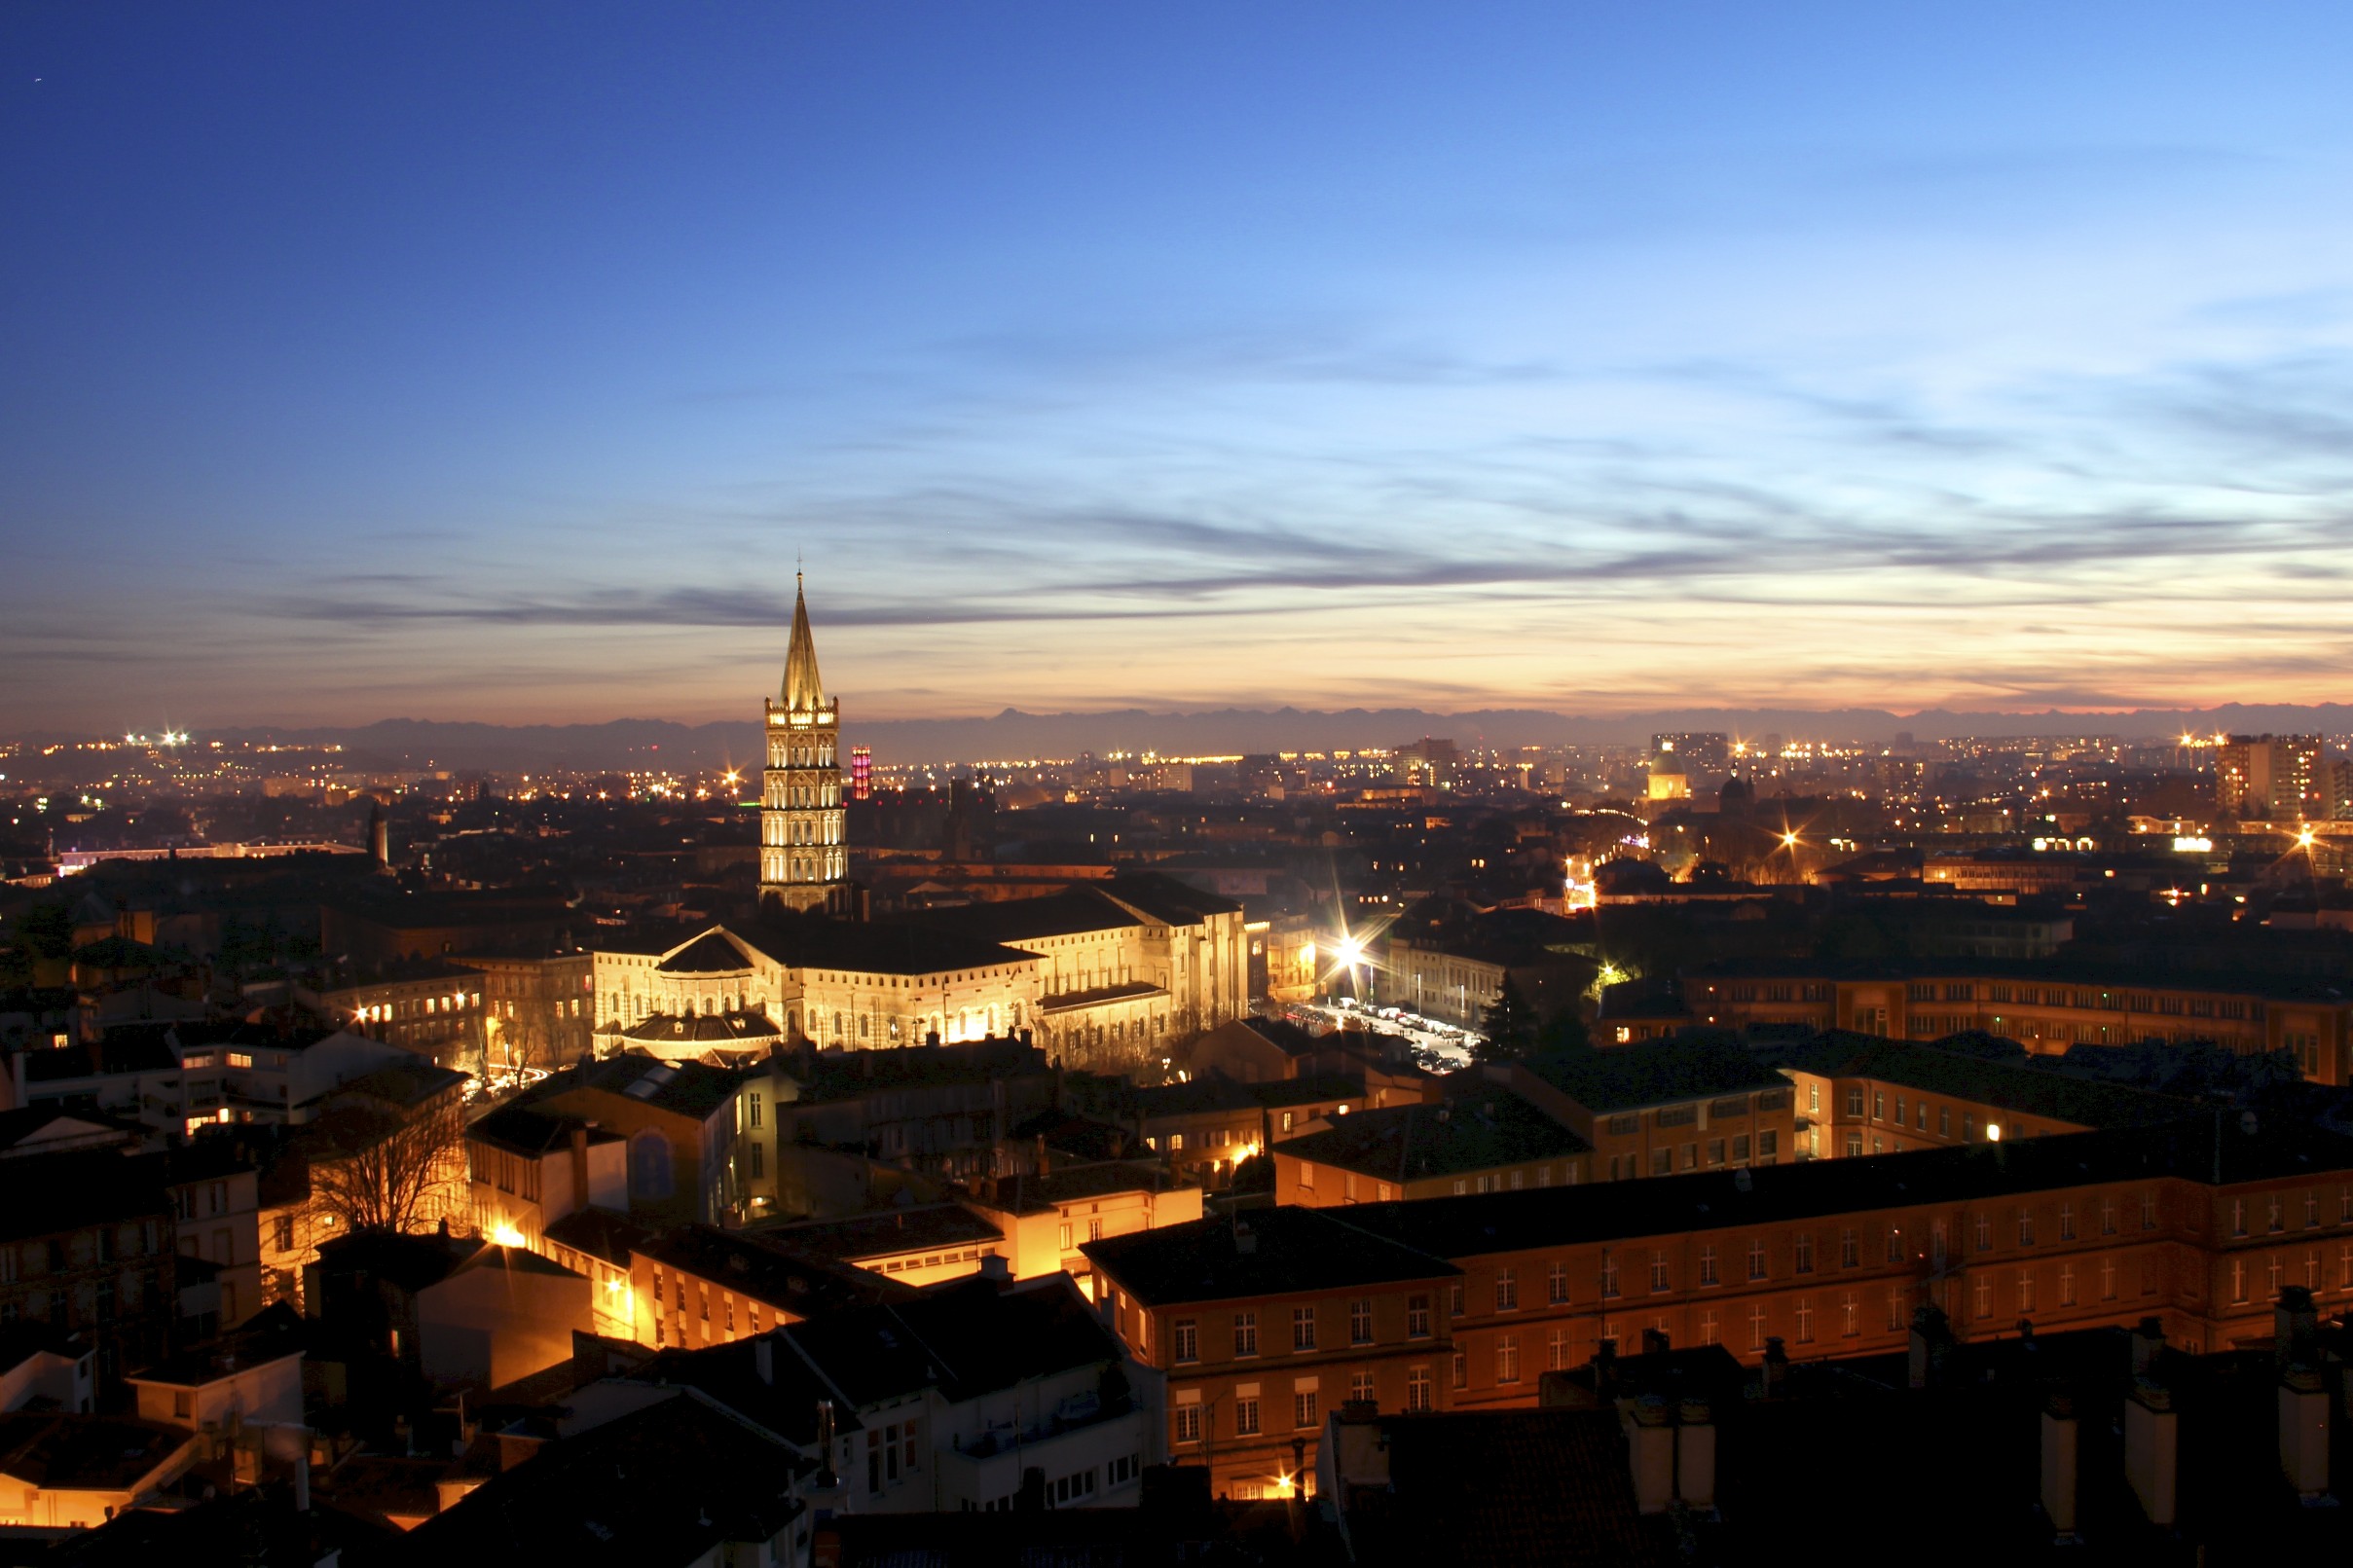 toulouse_by_night_with_basilique_saint-sernin.jpg